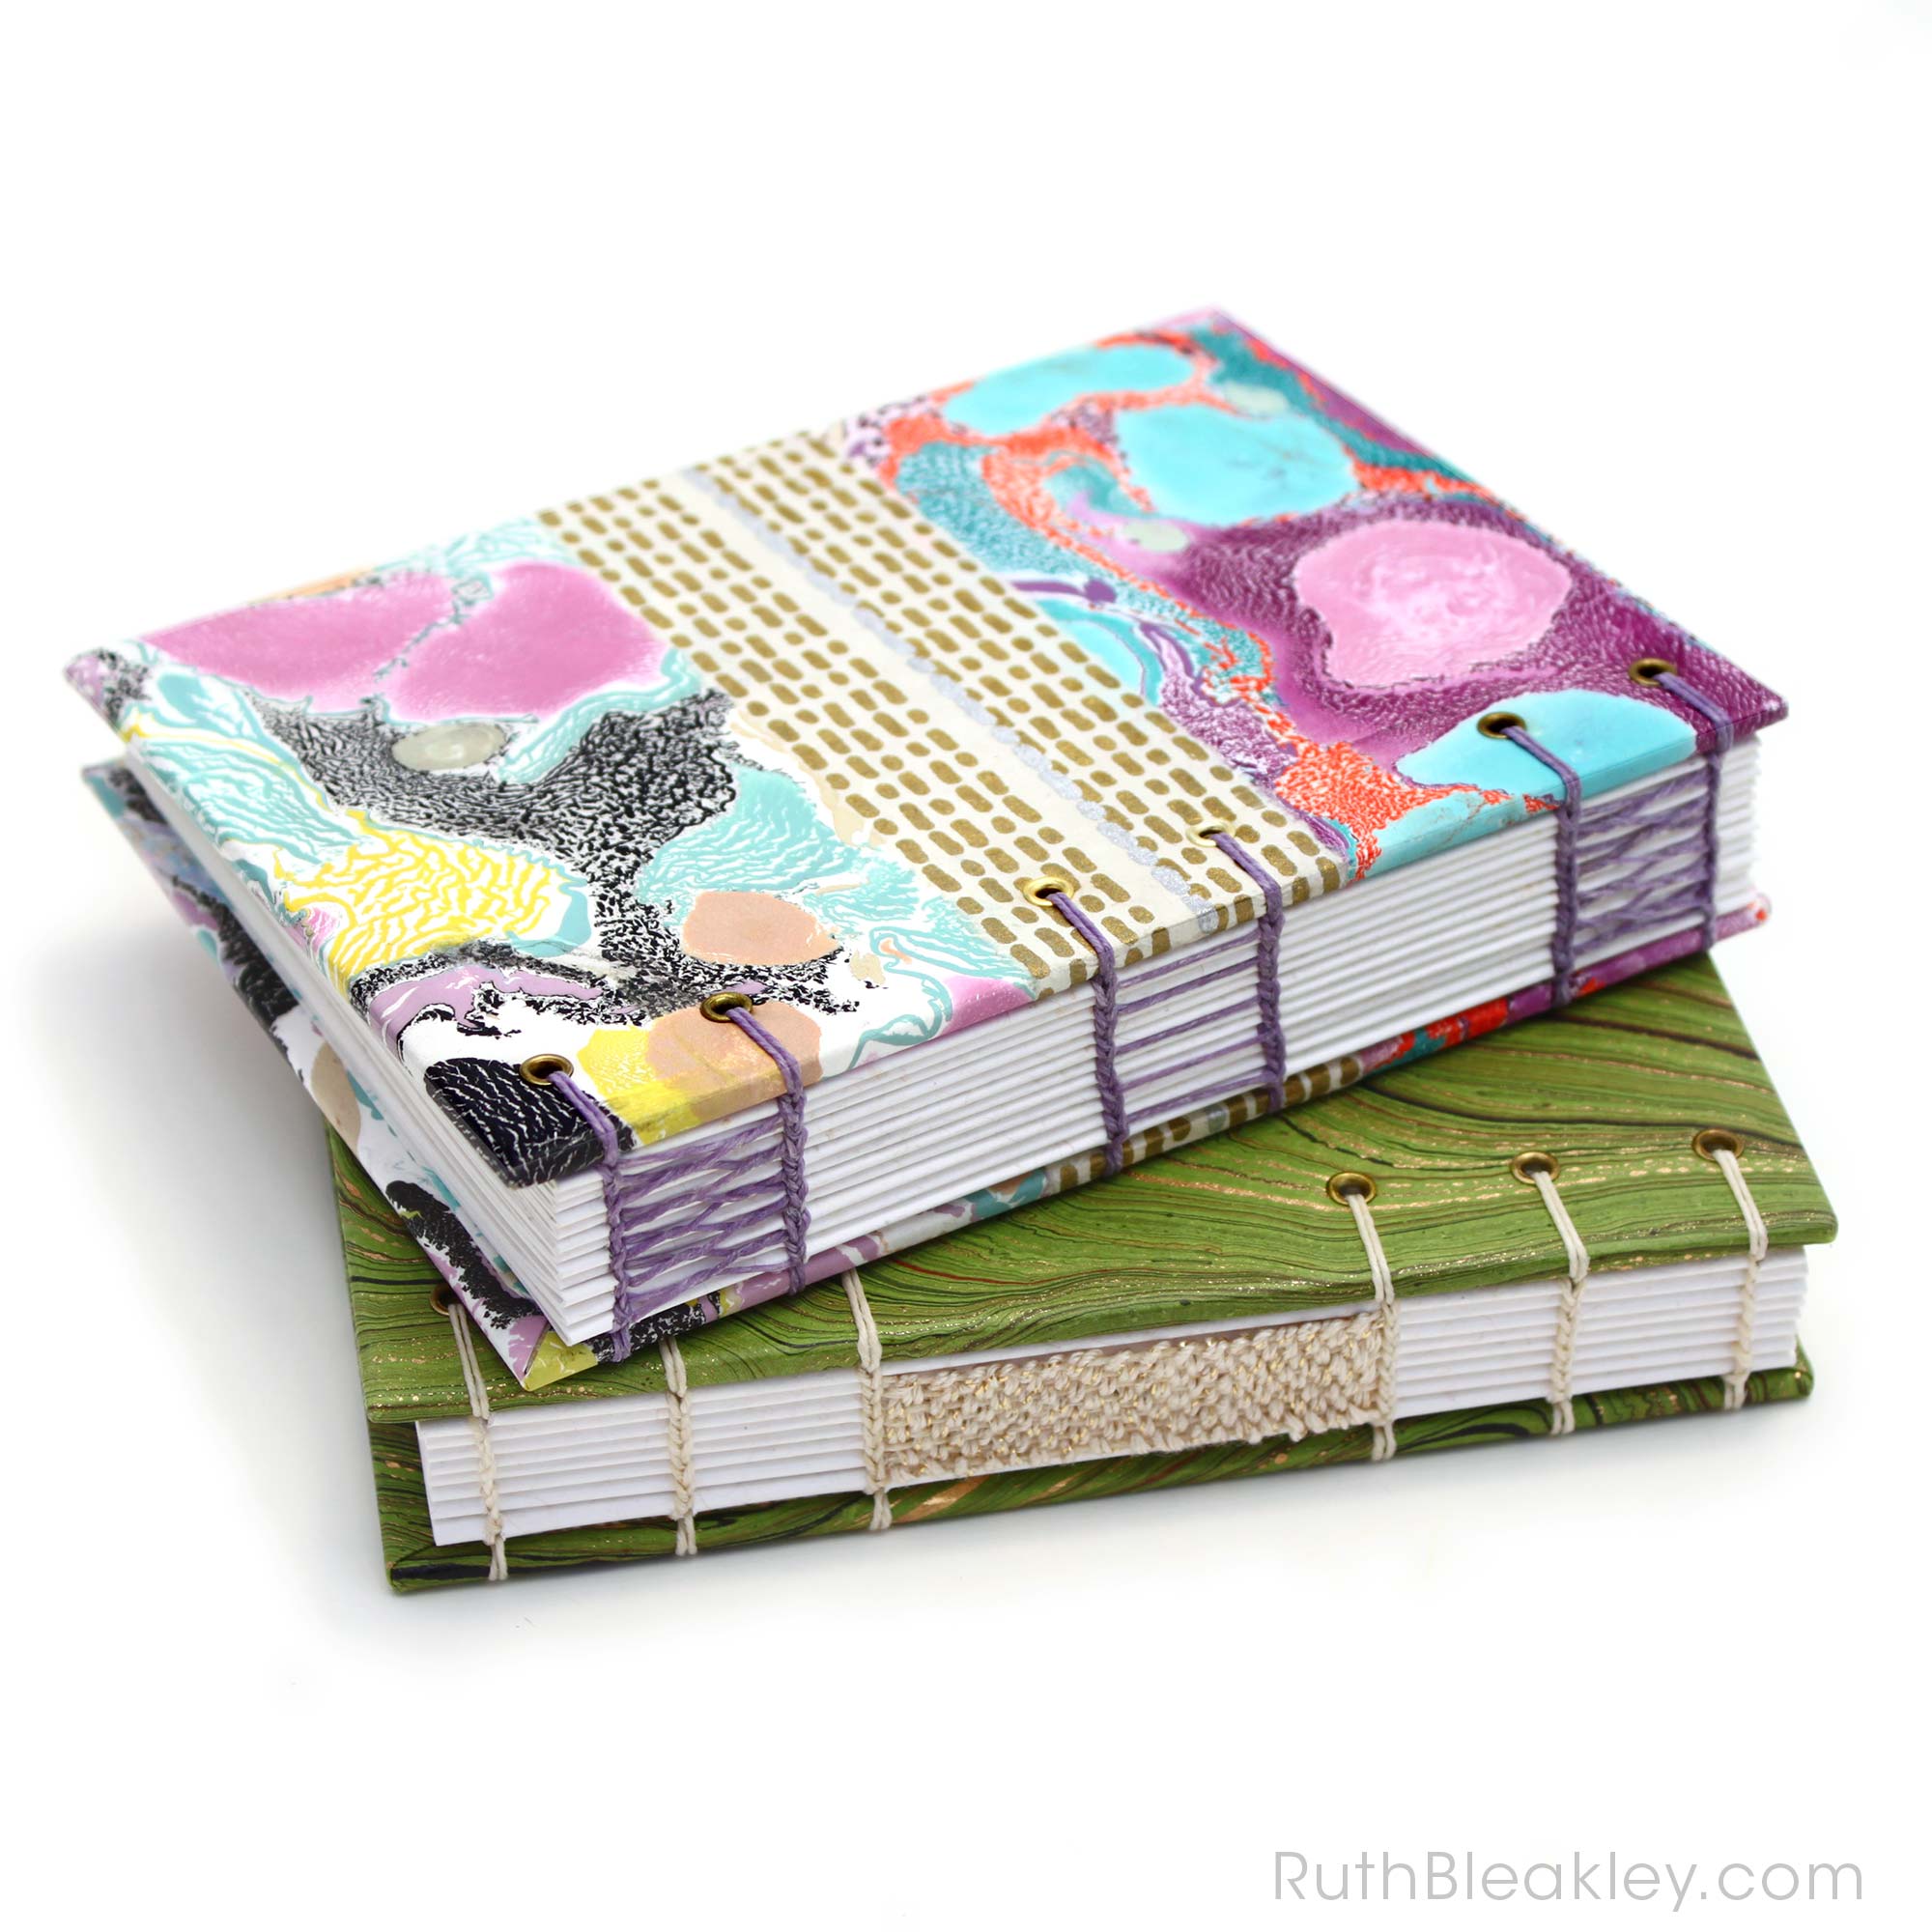 stack of two colorful handmade journals by Ruth Bleakley